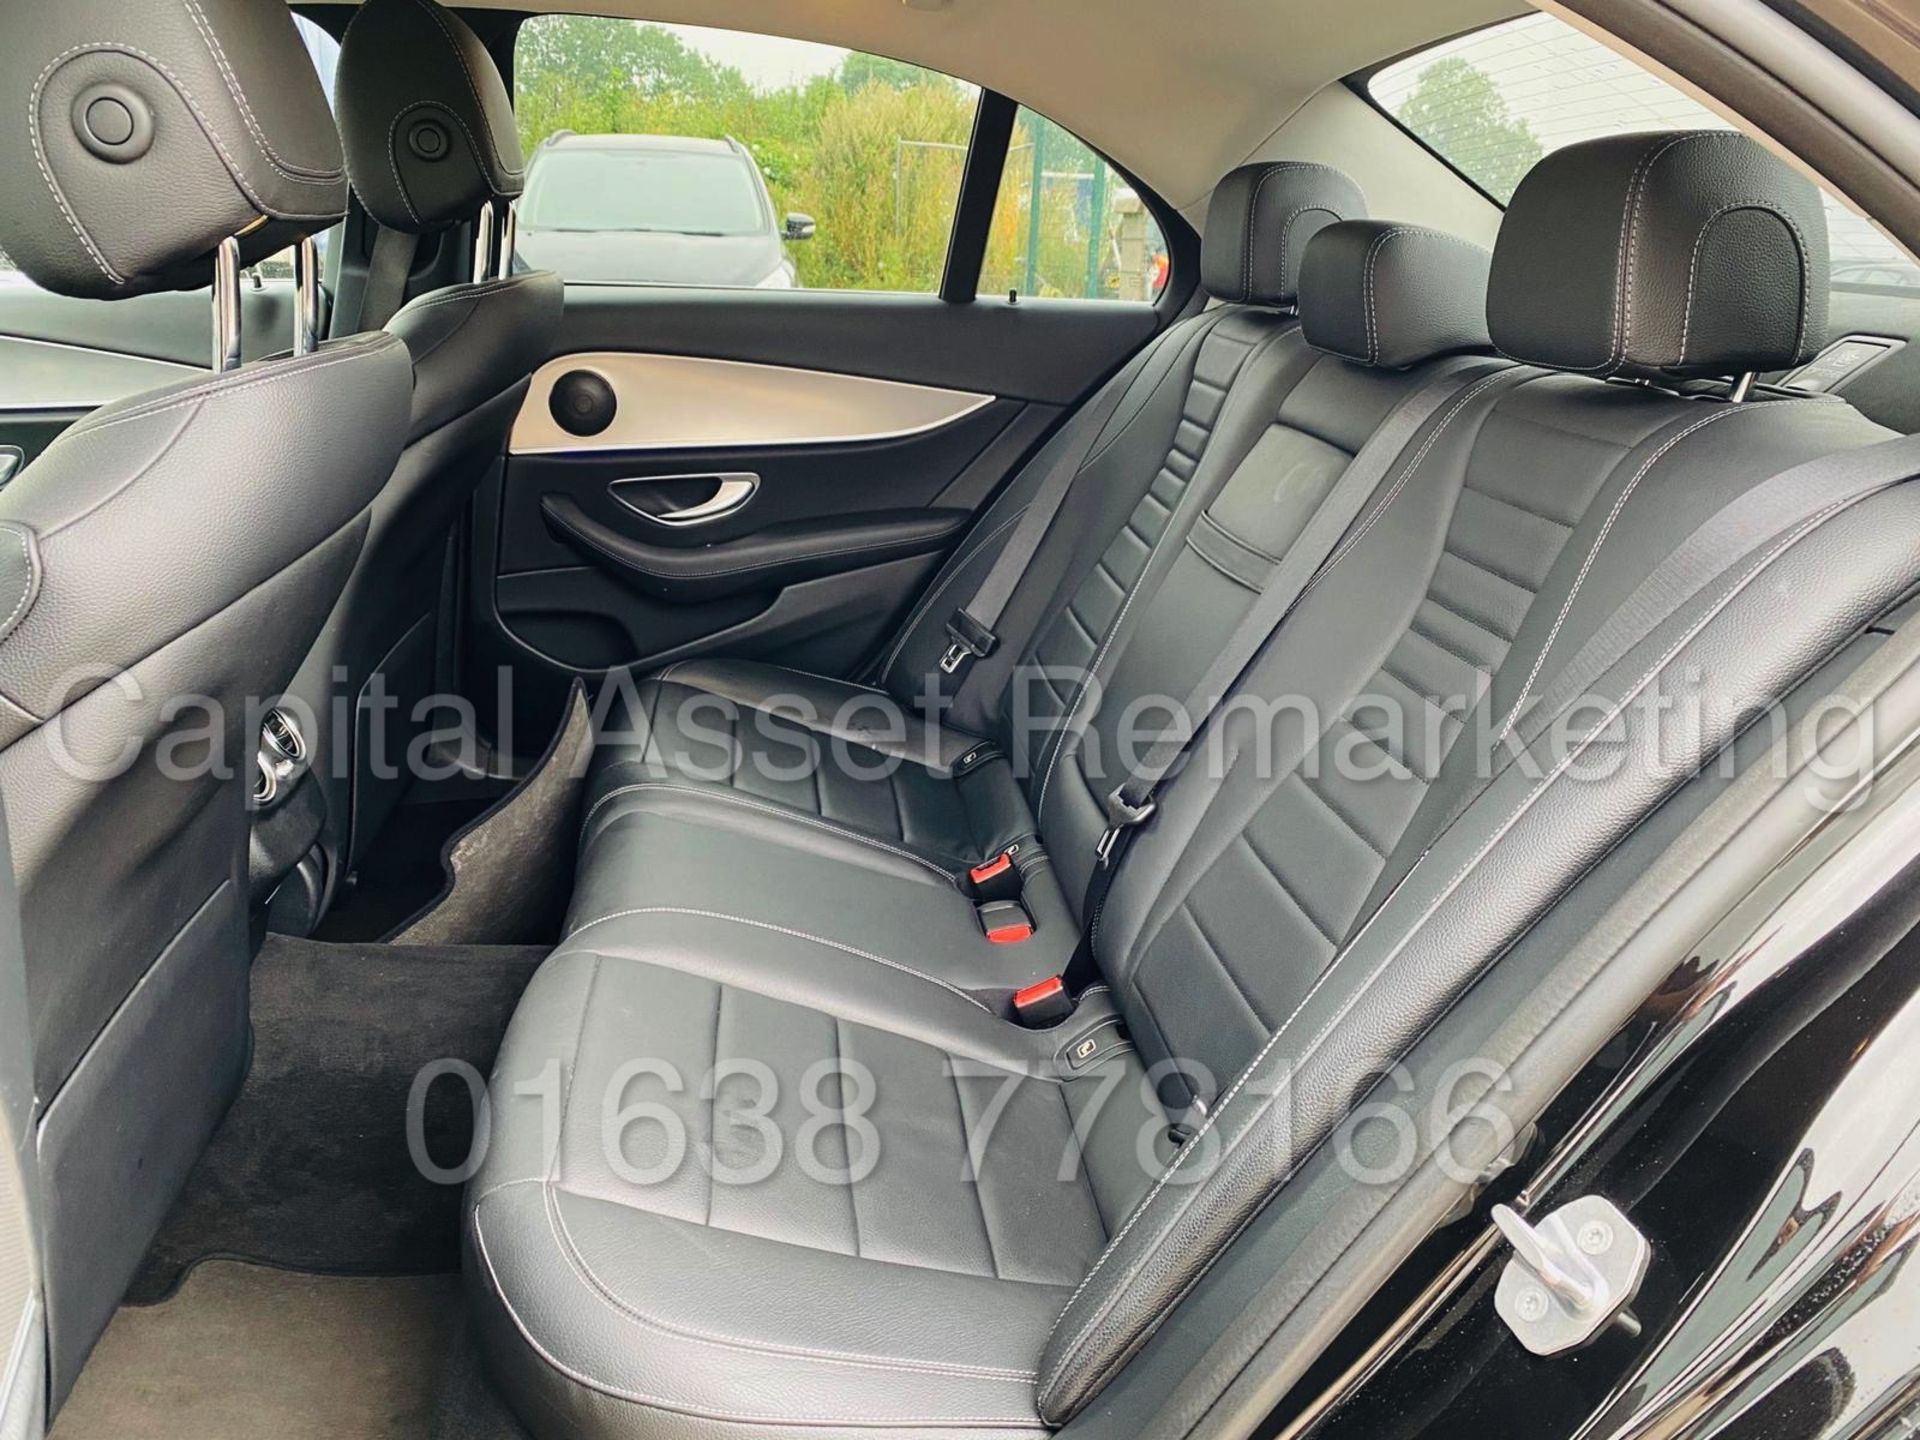 (On Sale) MERCEDES-BENZ E220D *SALOON* (2018 - NEW MODEL) '9-G TRONIC AUTO - LEATHER - SAT NAV' - Image 29 of 52